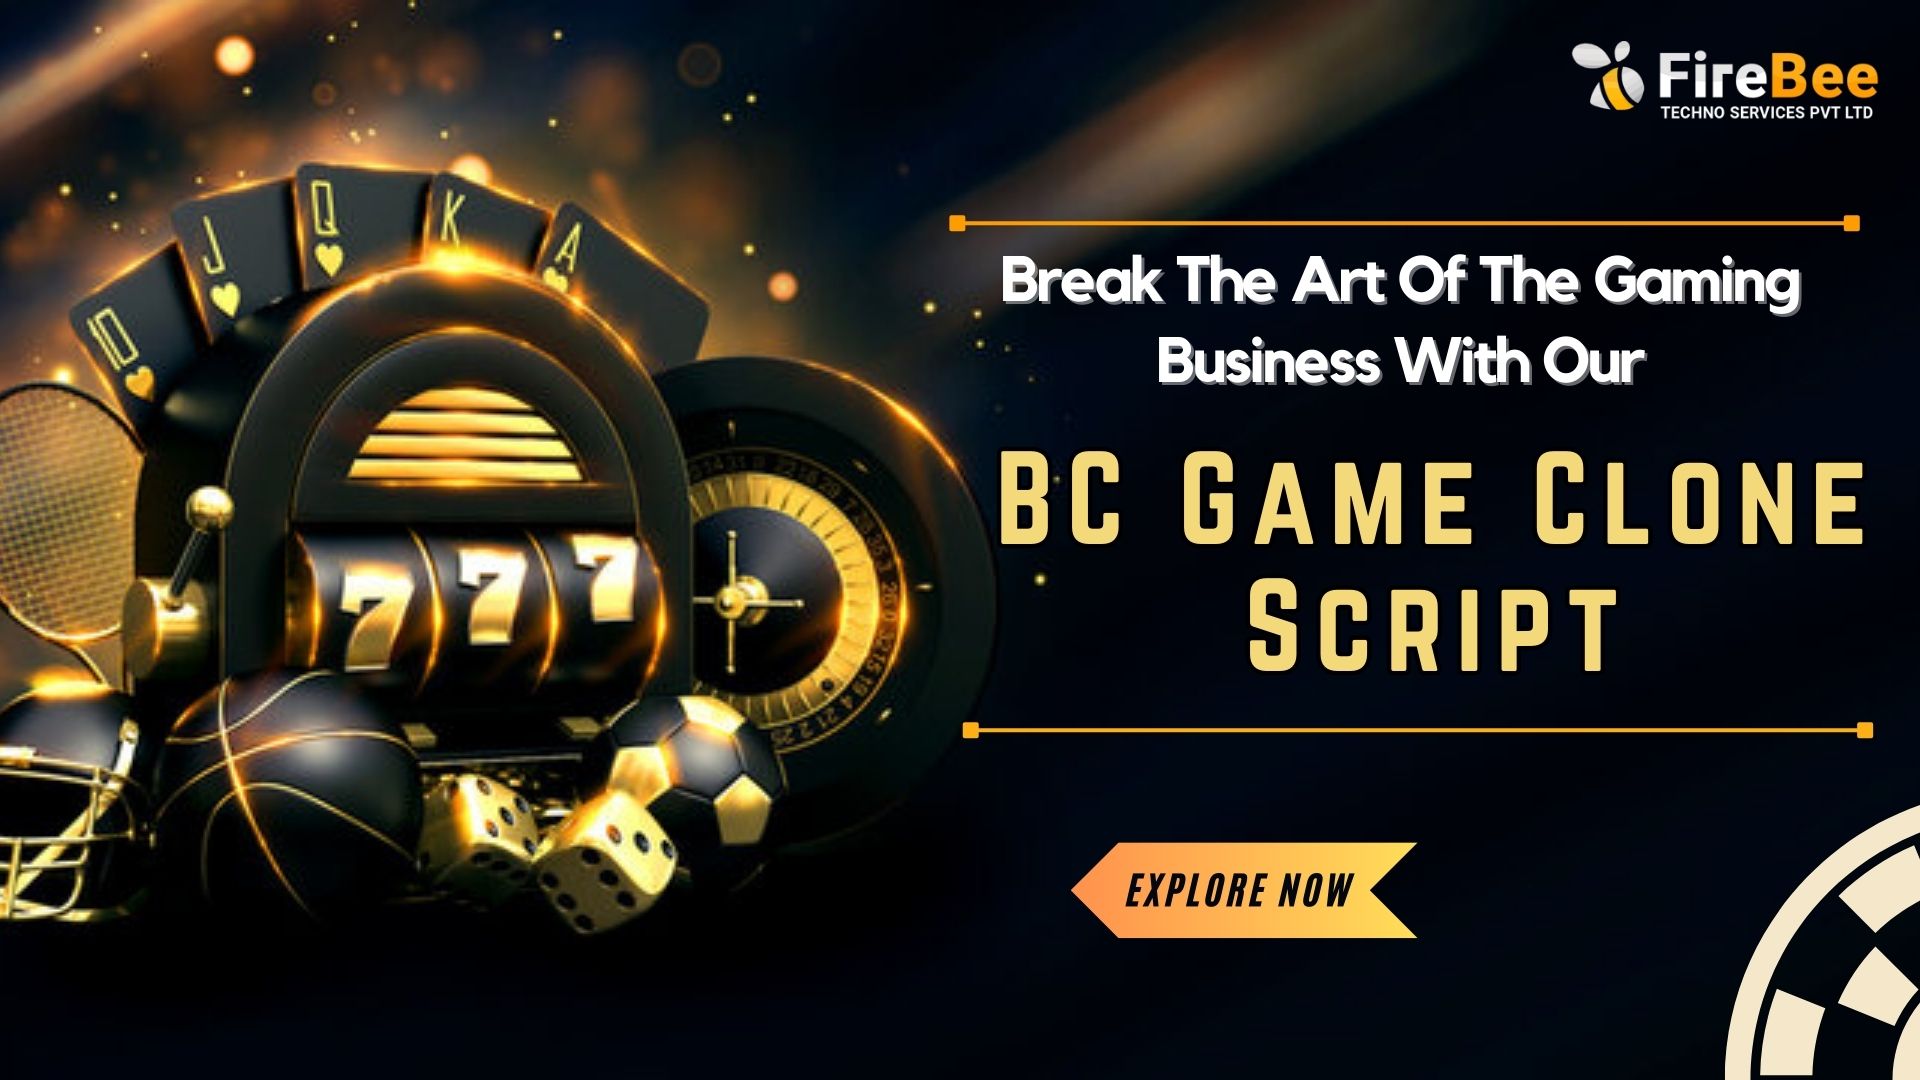 Break The Art Of The Gaming Business With Our BC Game Clone Script